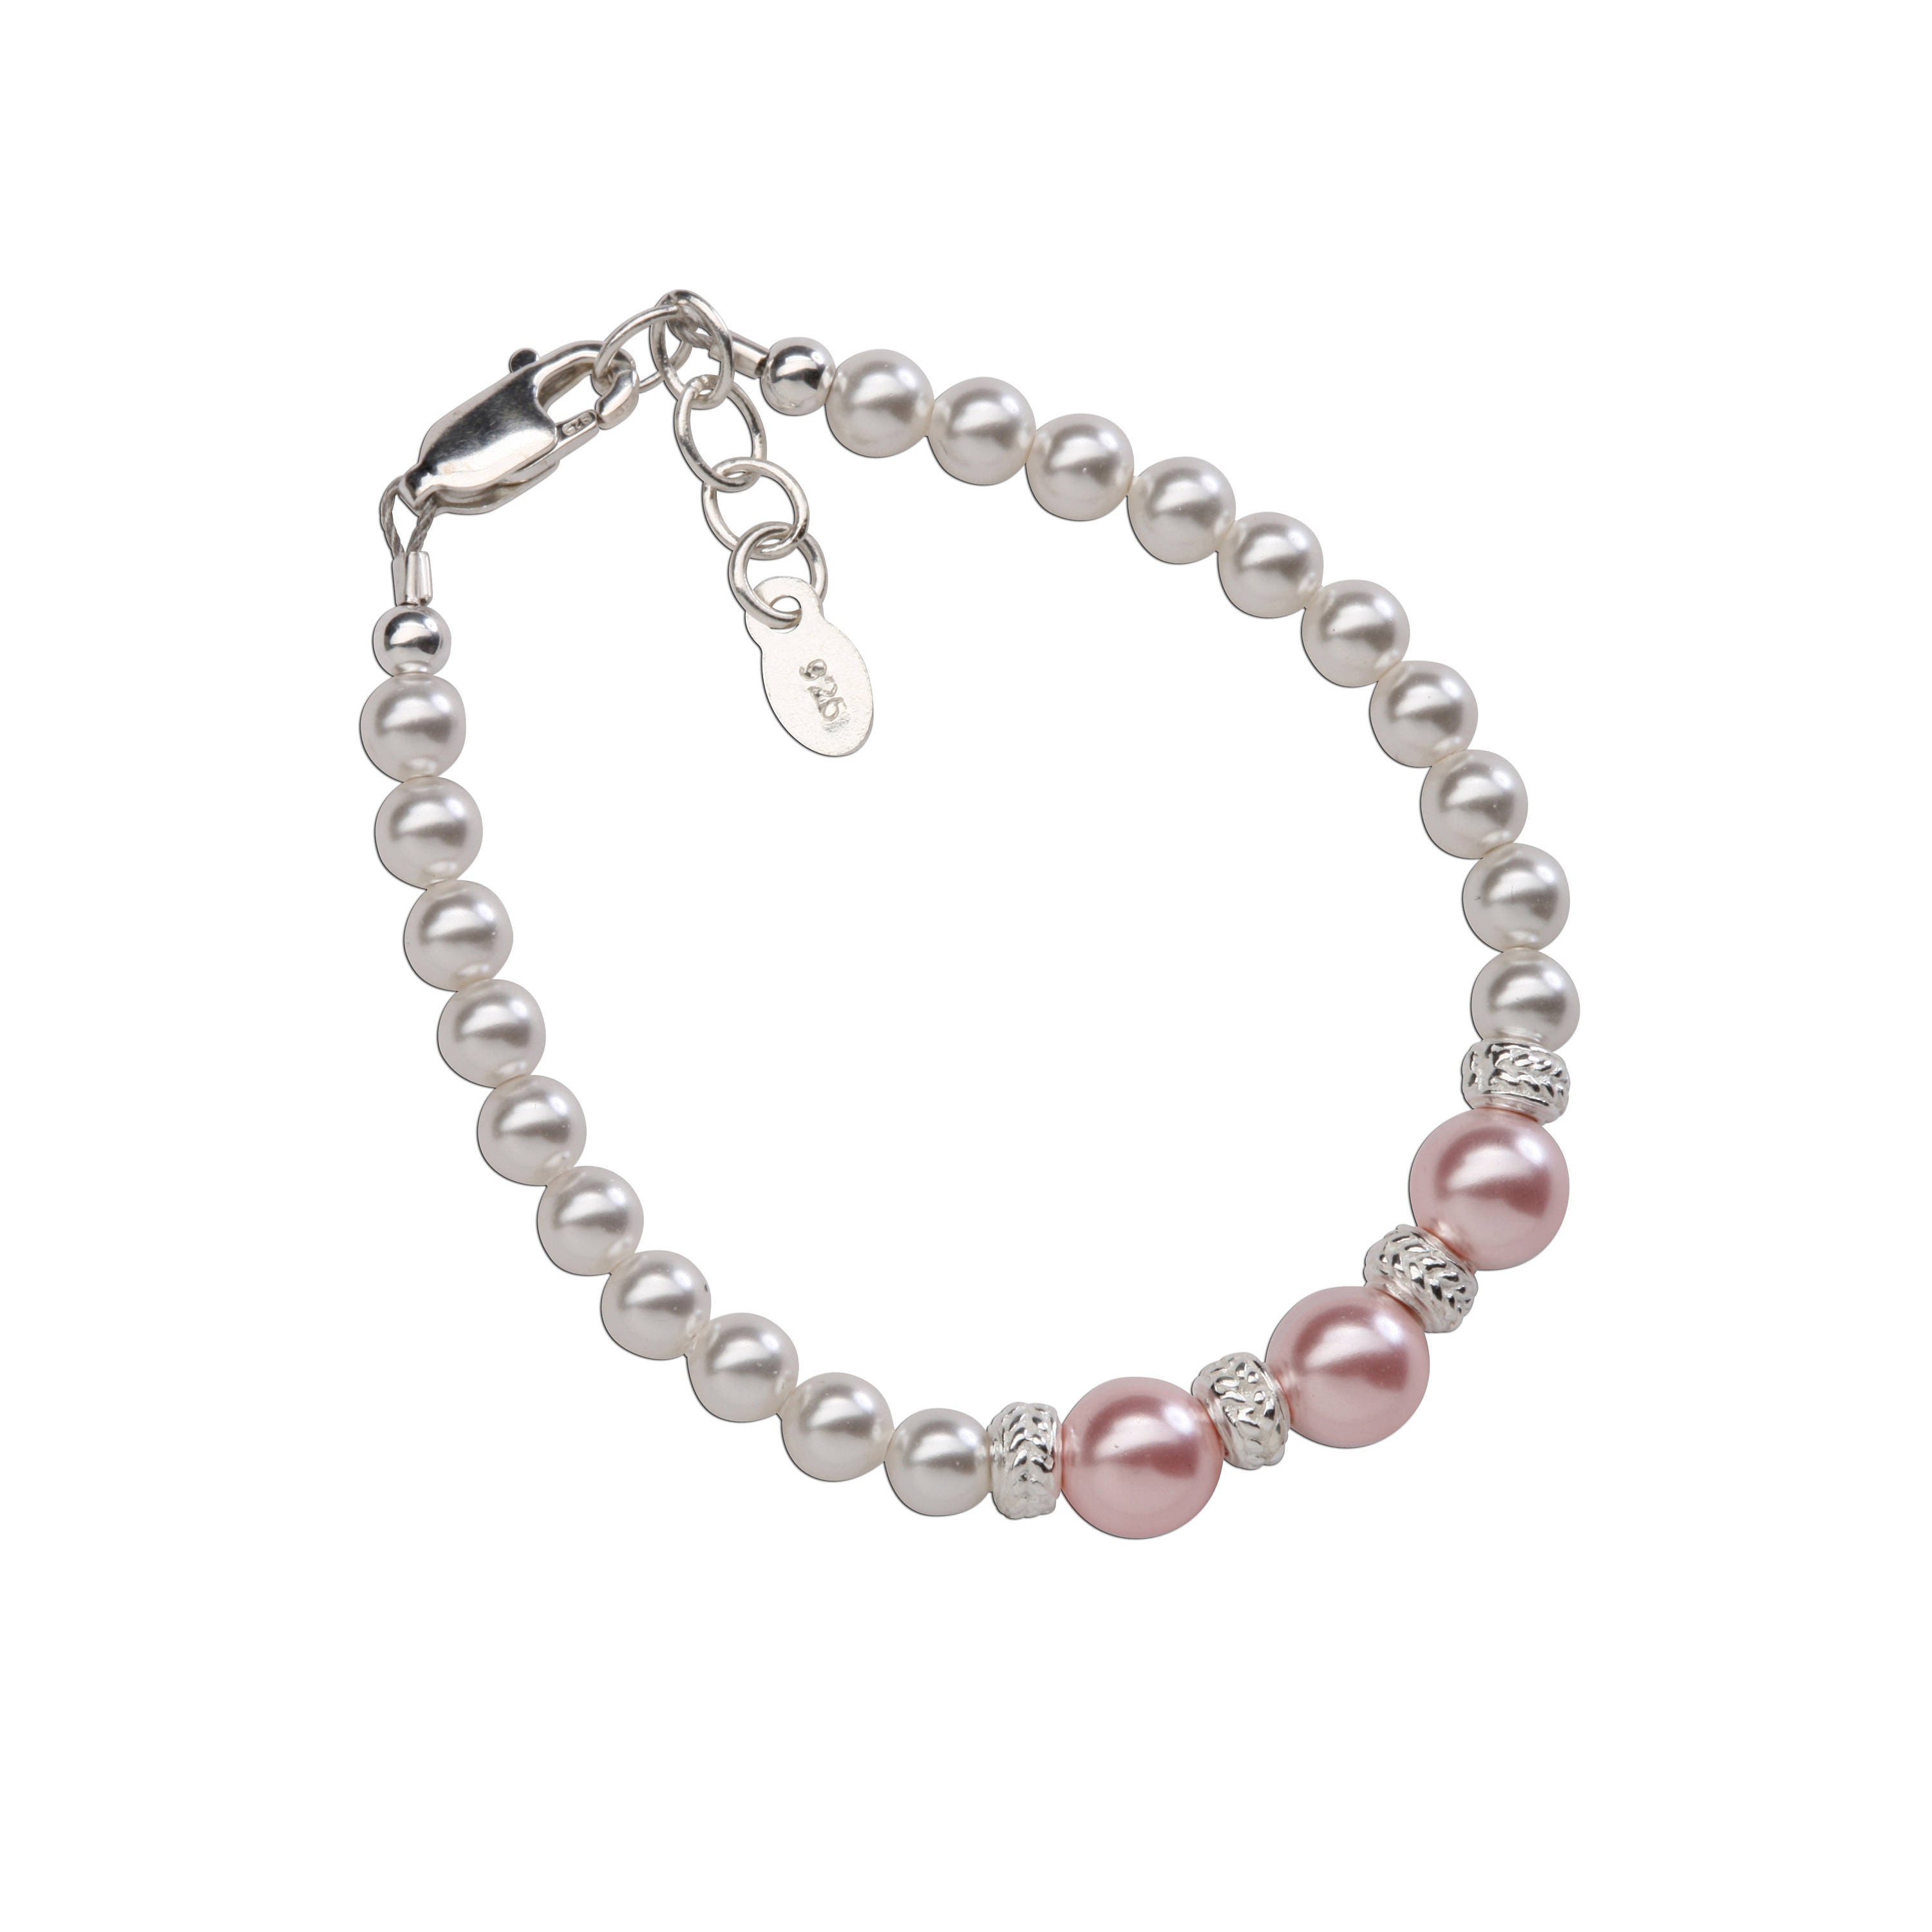 Baby/toddler silver plated or sterling silver filled white pearl bracelet 